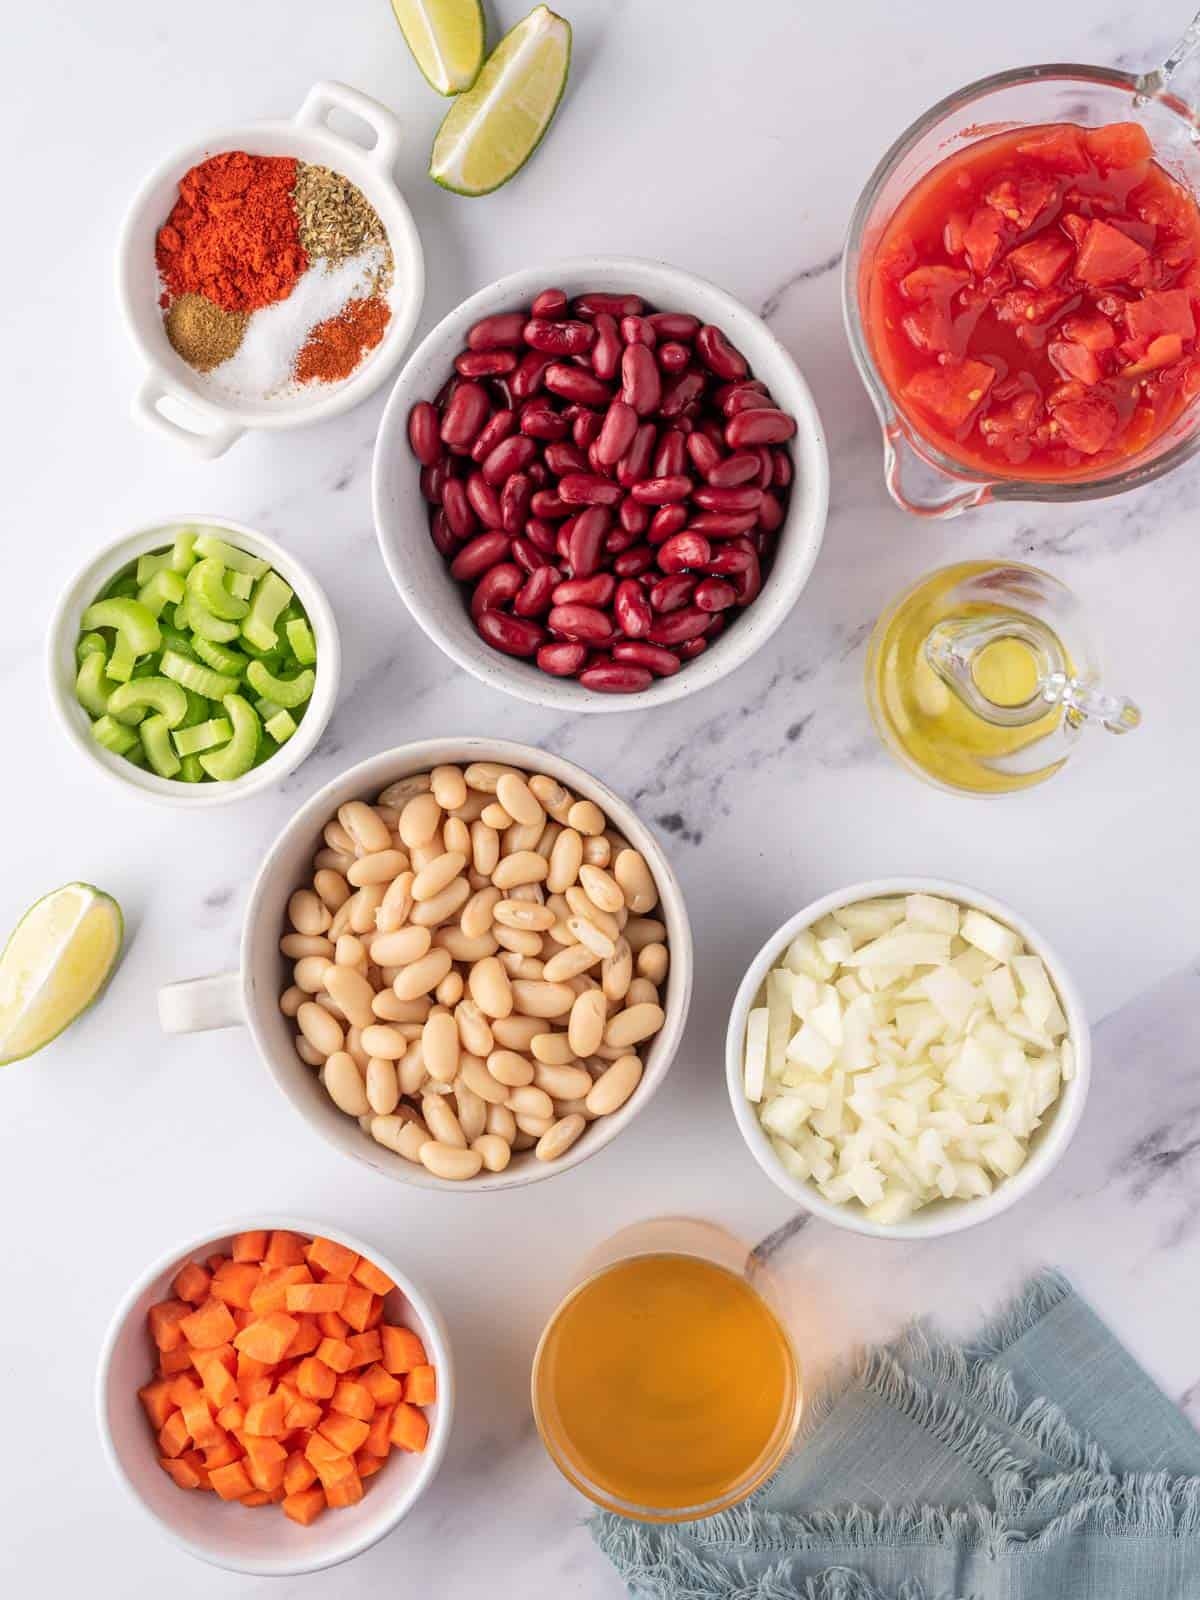 Bowls of ingredients needed for easy vegan chili.